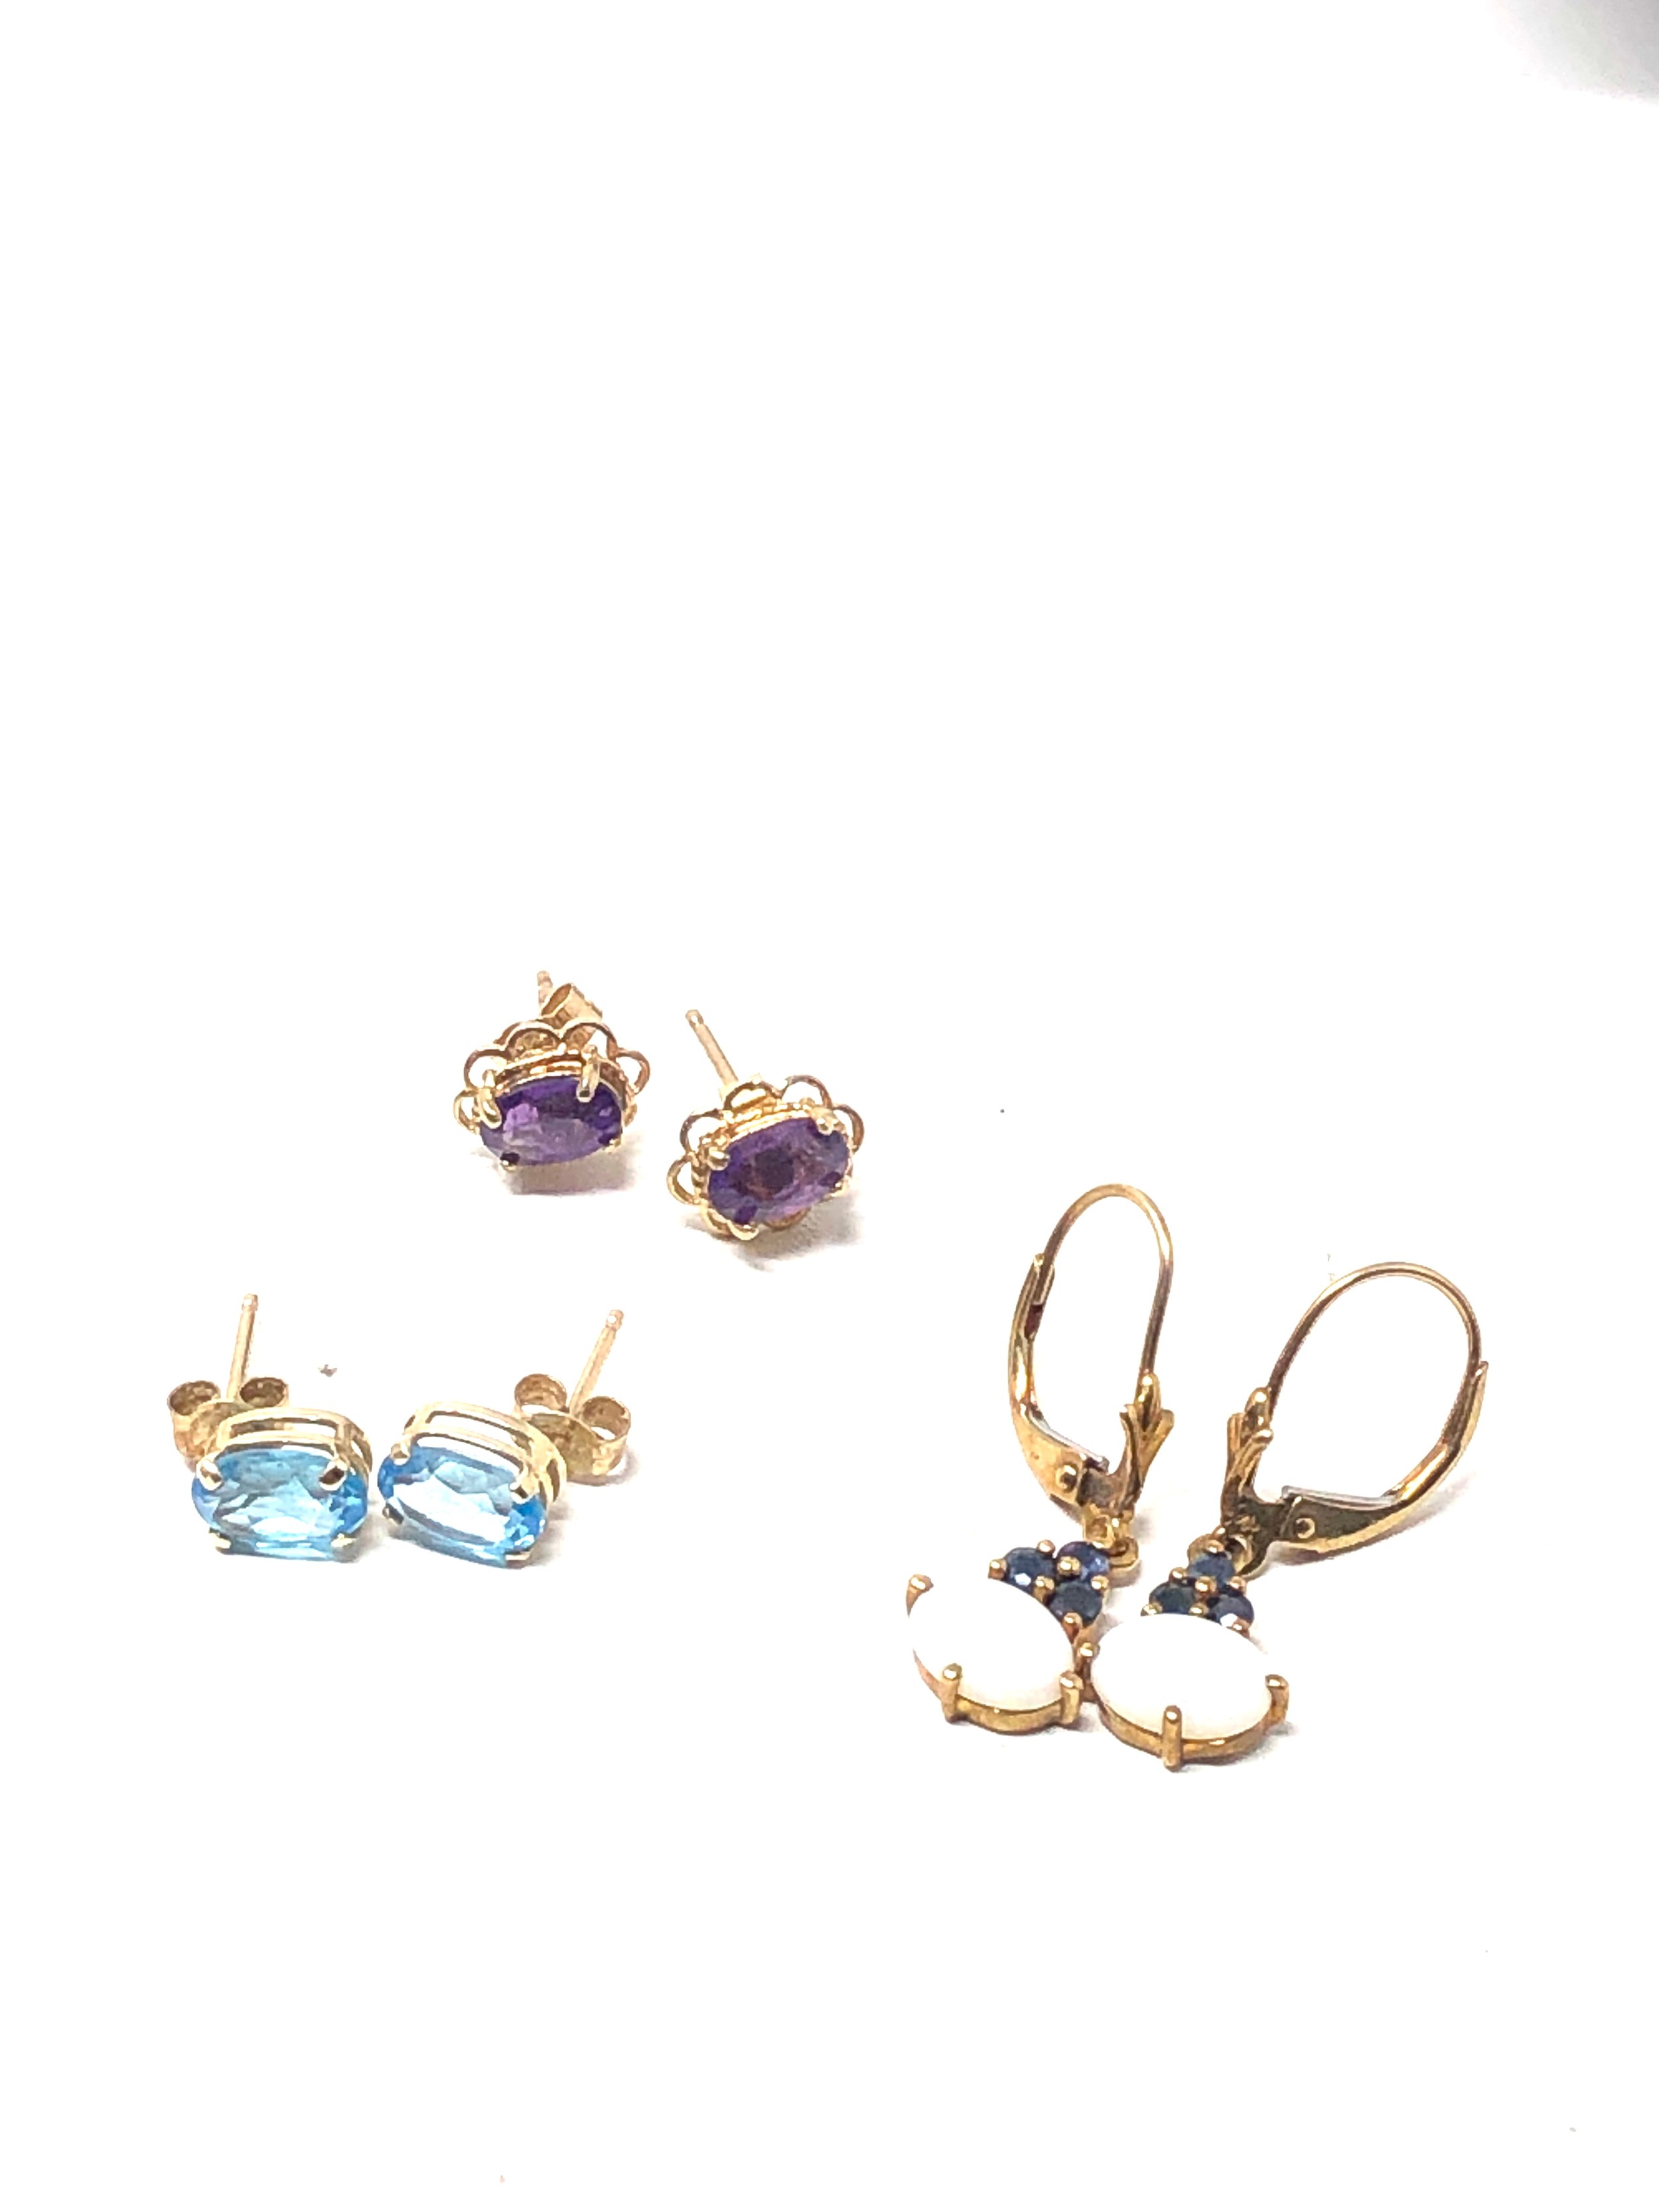 3 x 9ct gold paired gemstone stud earrings inc. amethyst & sapphire